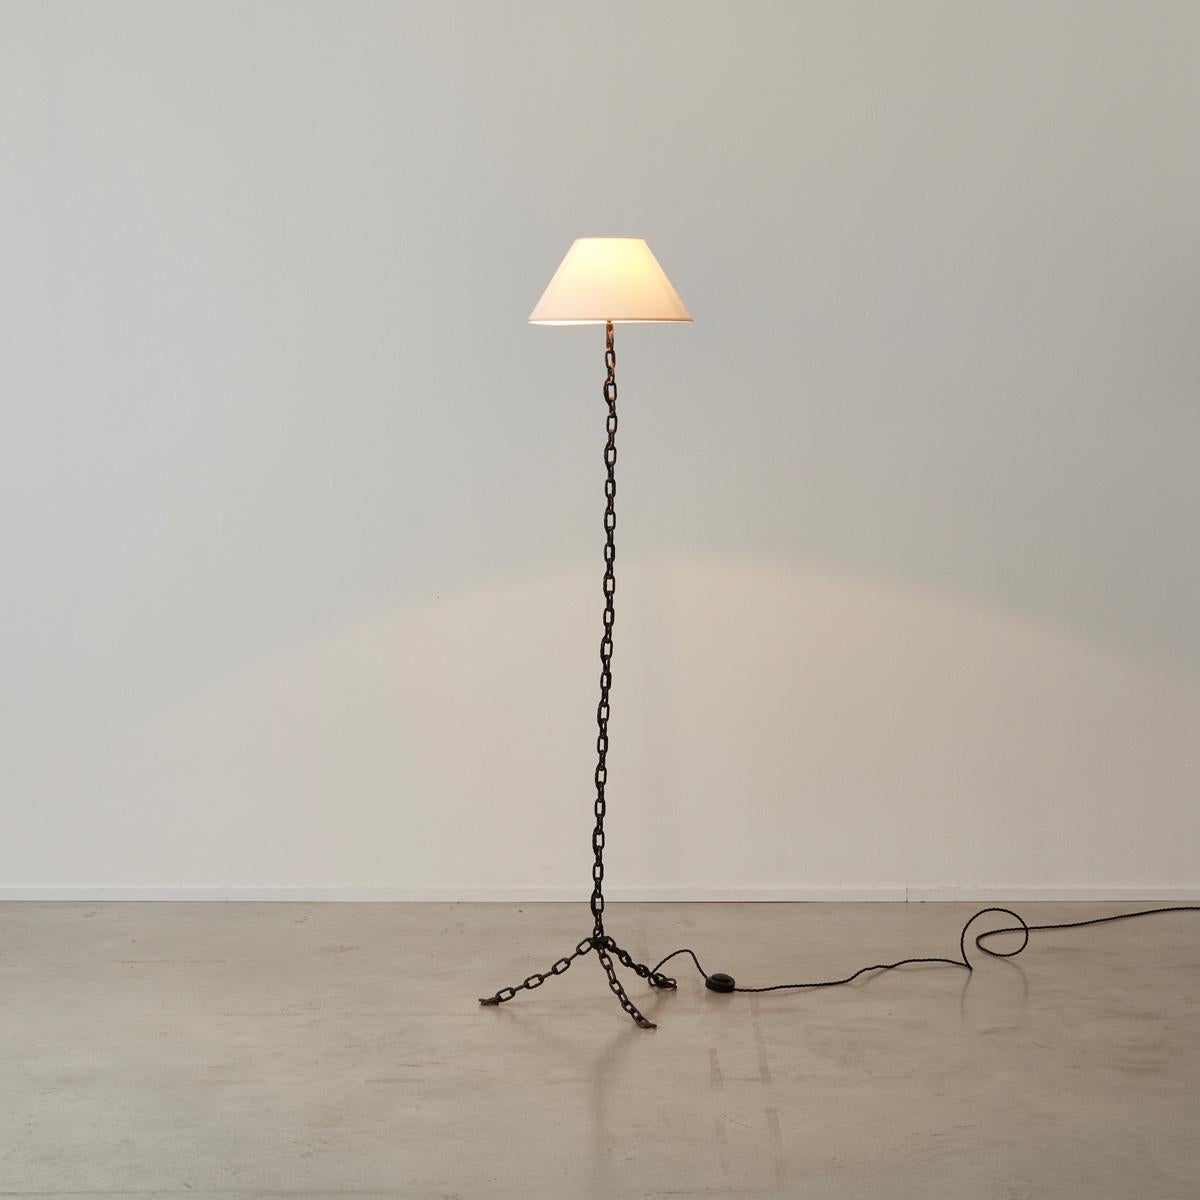 Enameled and welded black iron chain floor lamp, in the manner of artist Franz West.

Slight wear on material shade, slight rust and losses to paint/enamel coating.